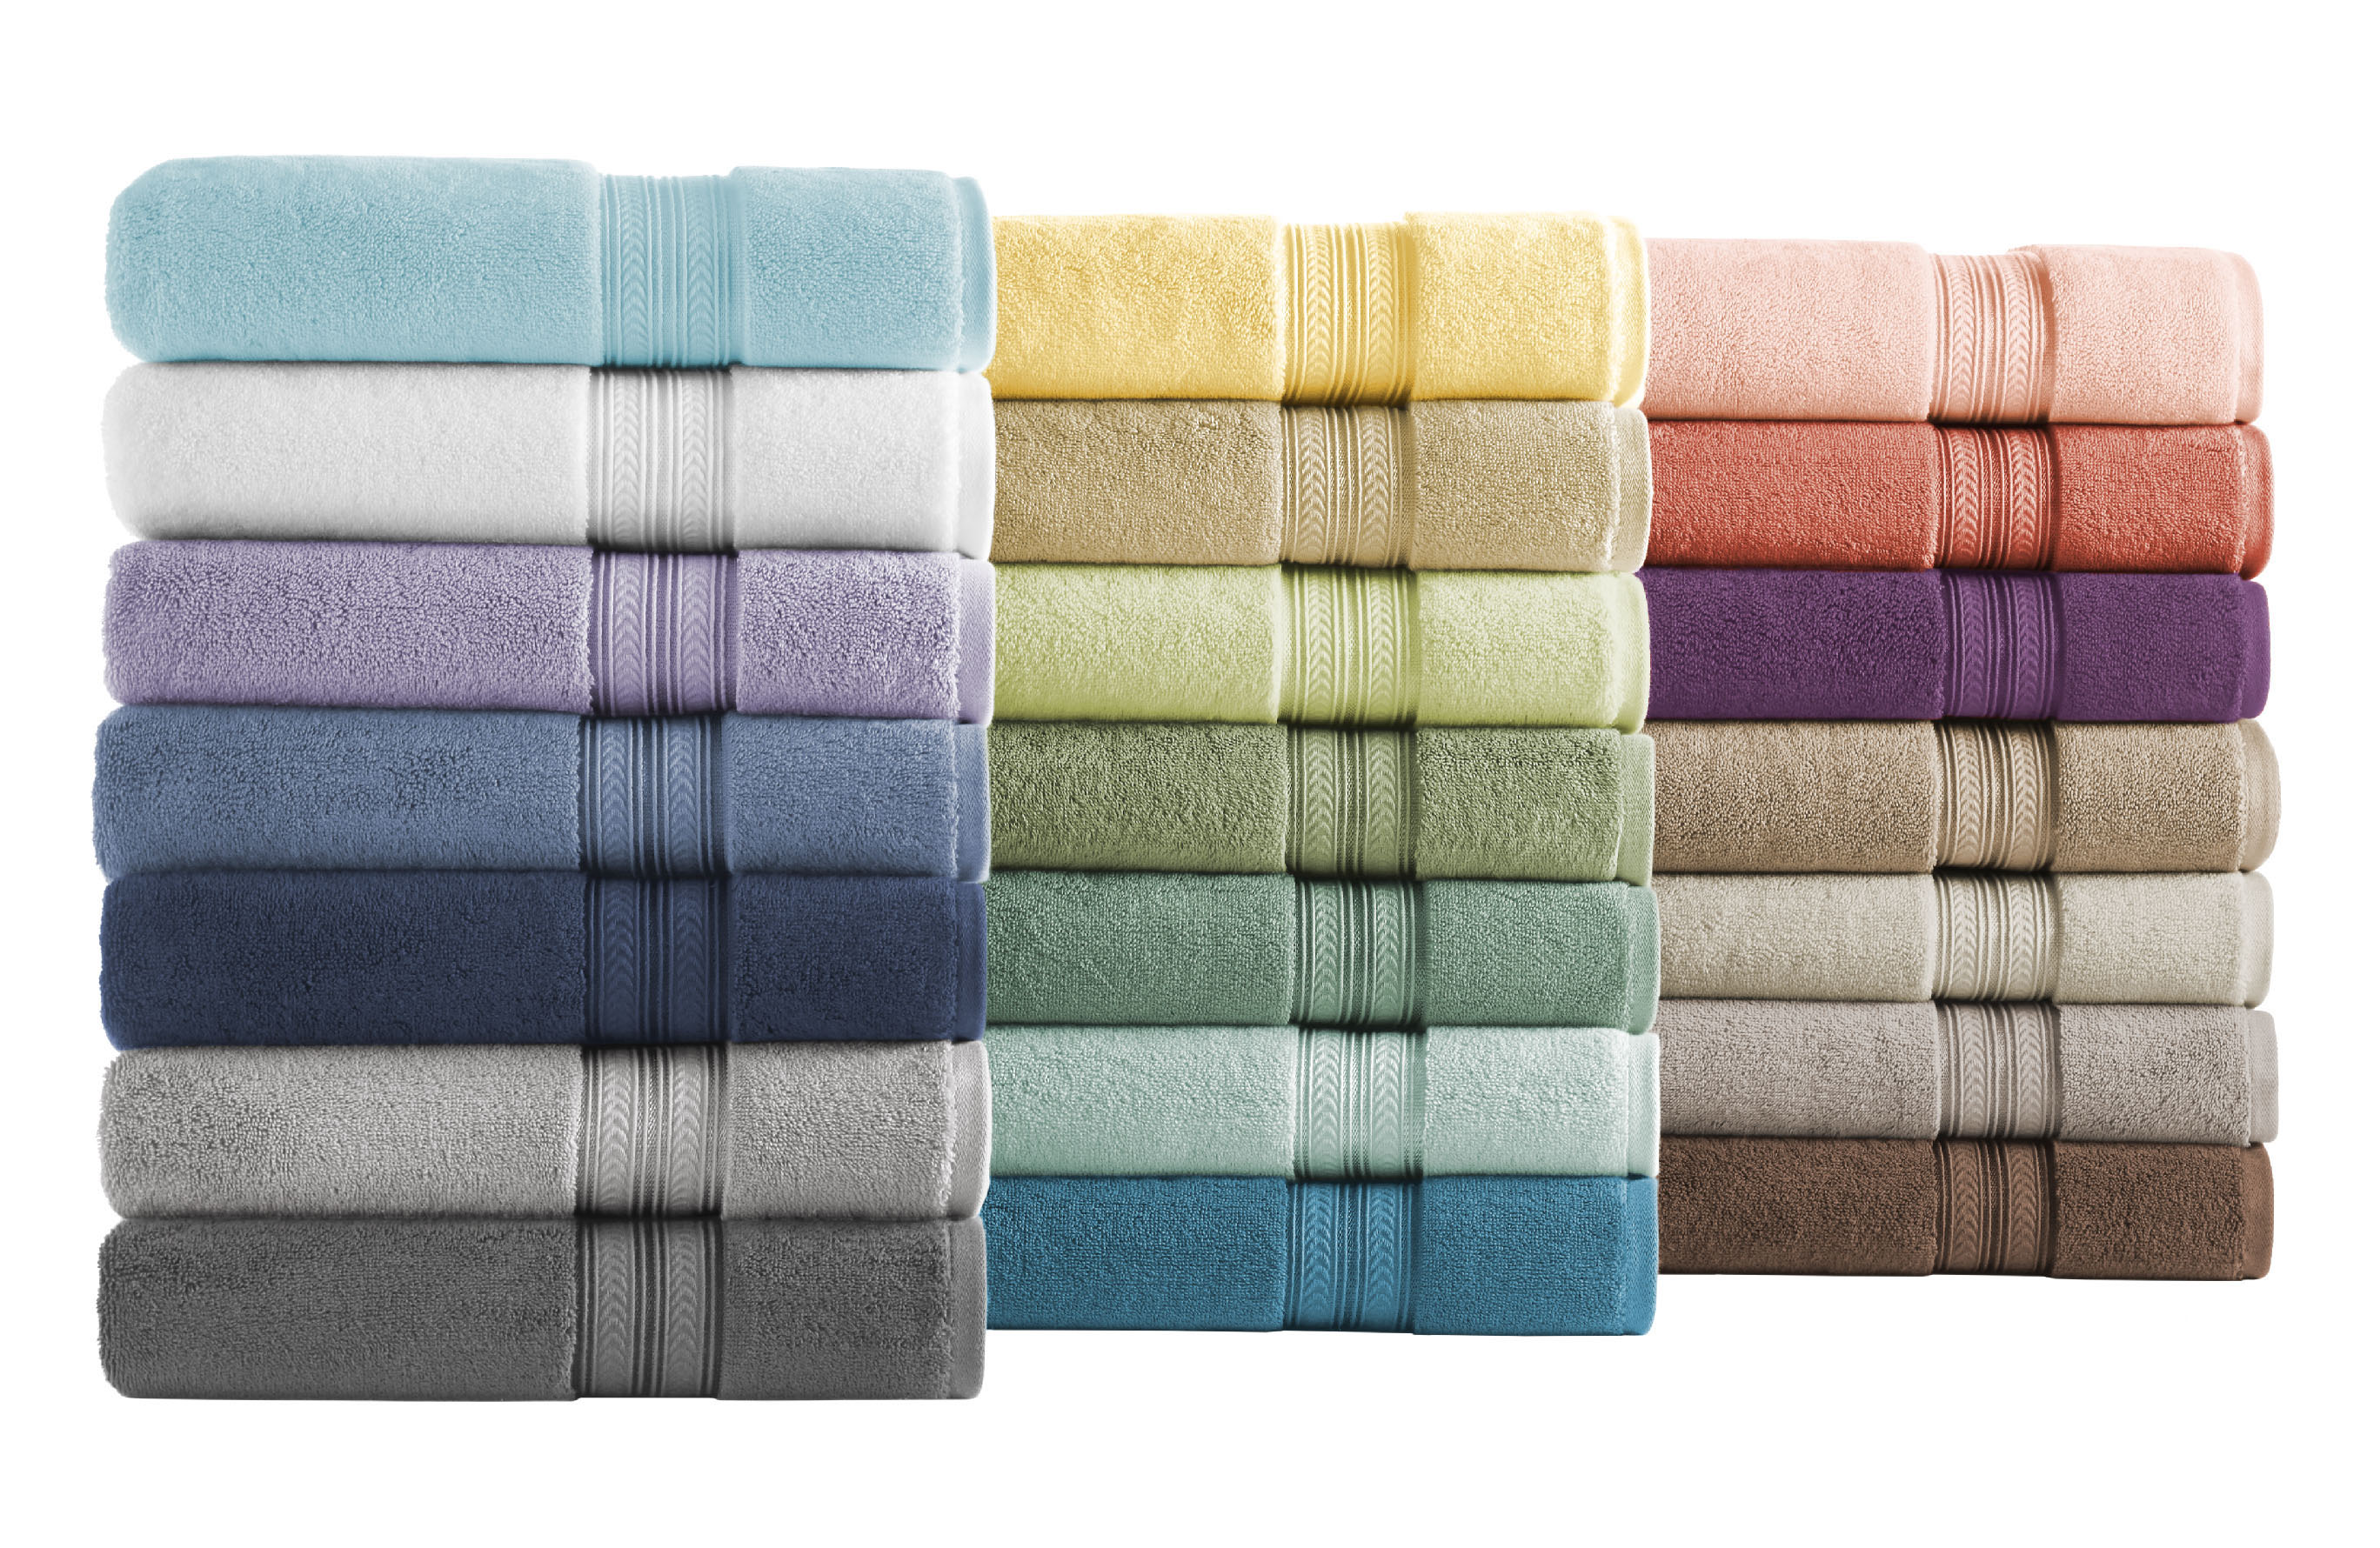 Arctic White Bath Sheet, Better Homes & Gardens Thick and Plush Towel Collection - image 4 of 5